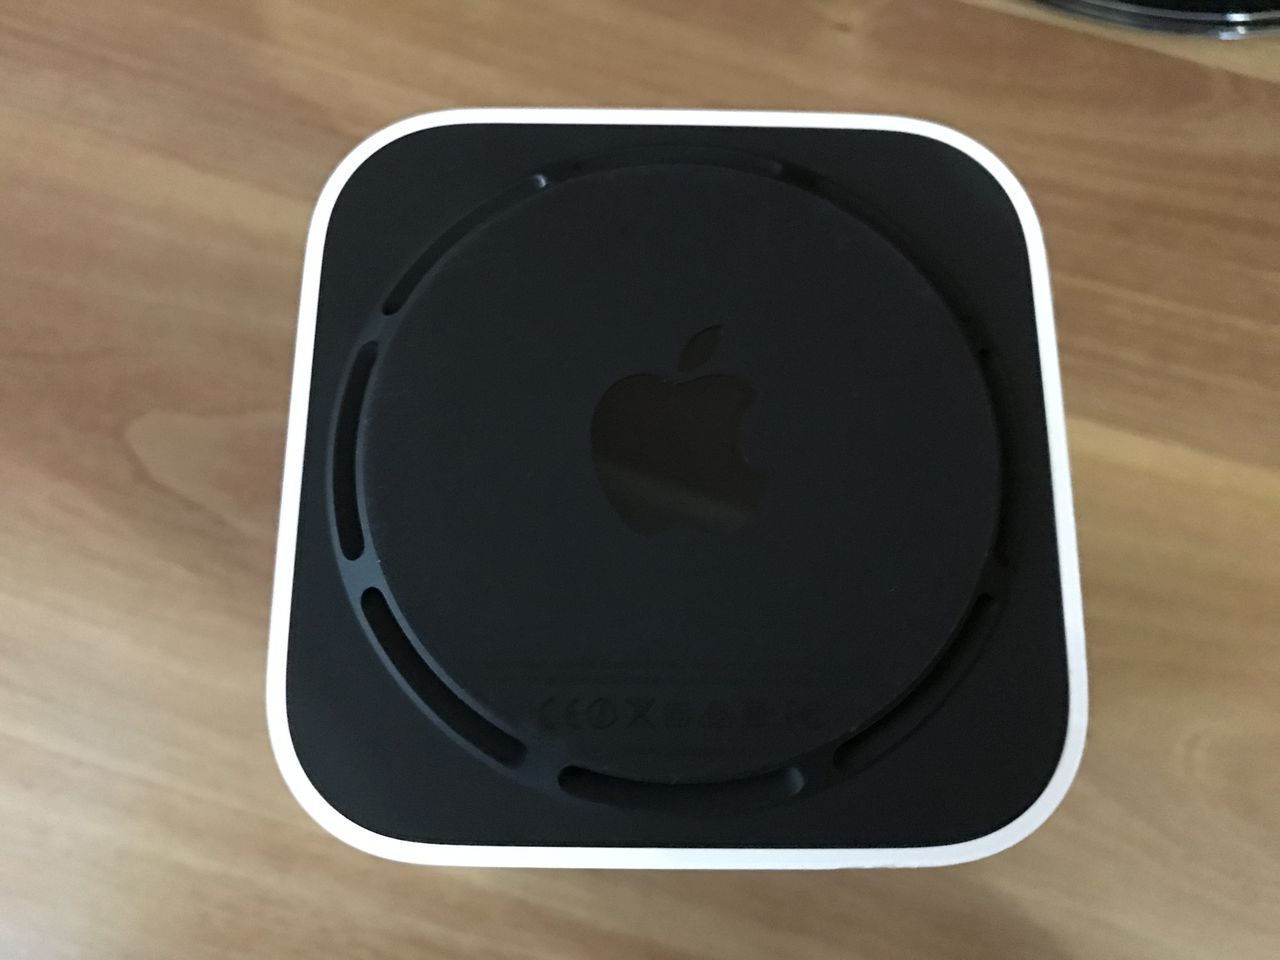 apple airport extreme base station 6th generation